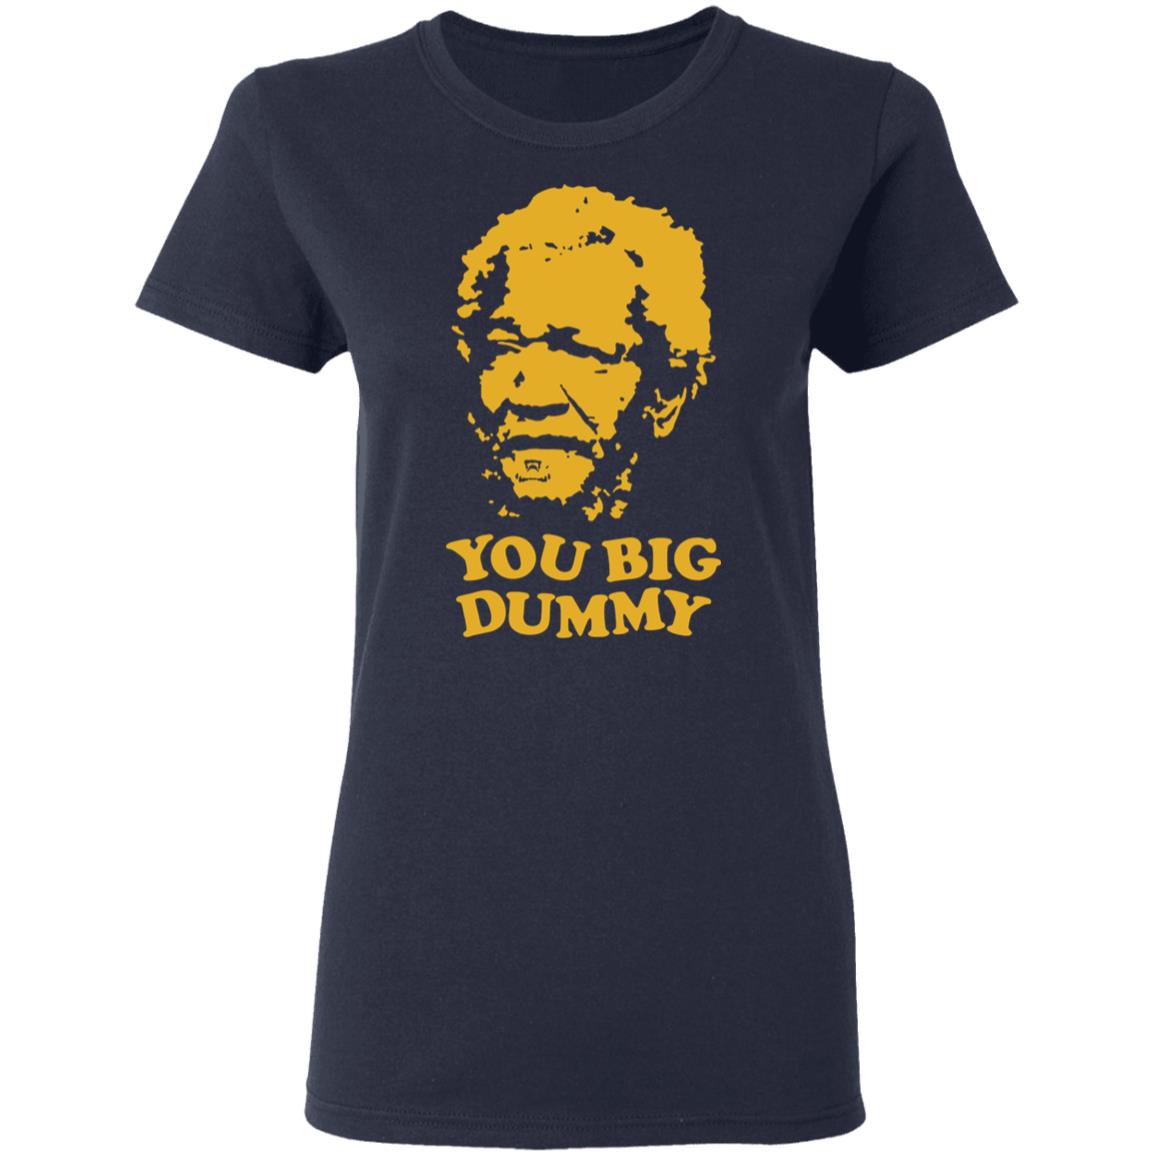 Download Sanford and Son You big Dummy shirt - Rockatee